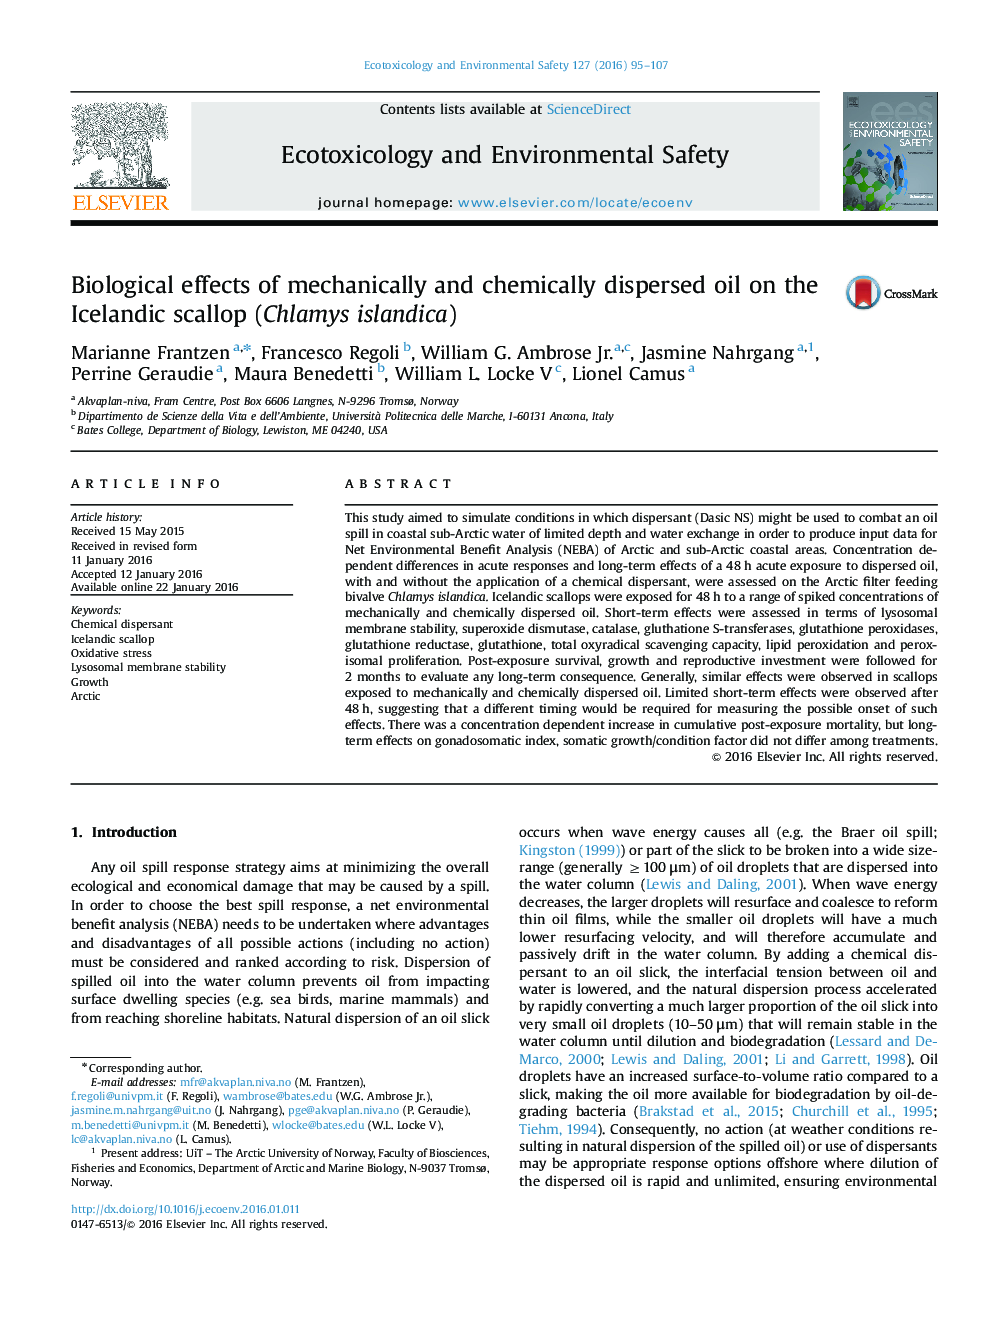 Biological effects of mechanically and chemically dispersed oil on the Icelandic scallop (Chlamys islandica)